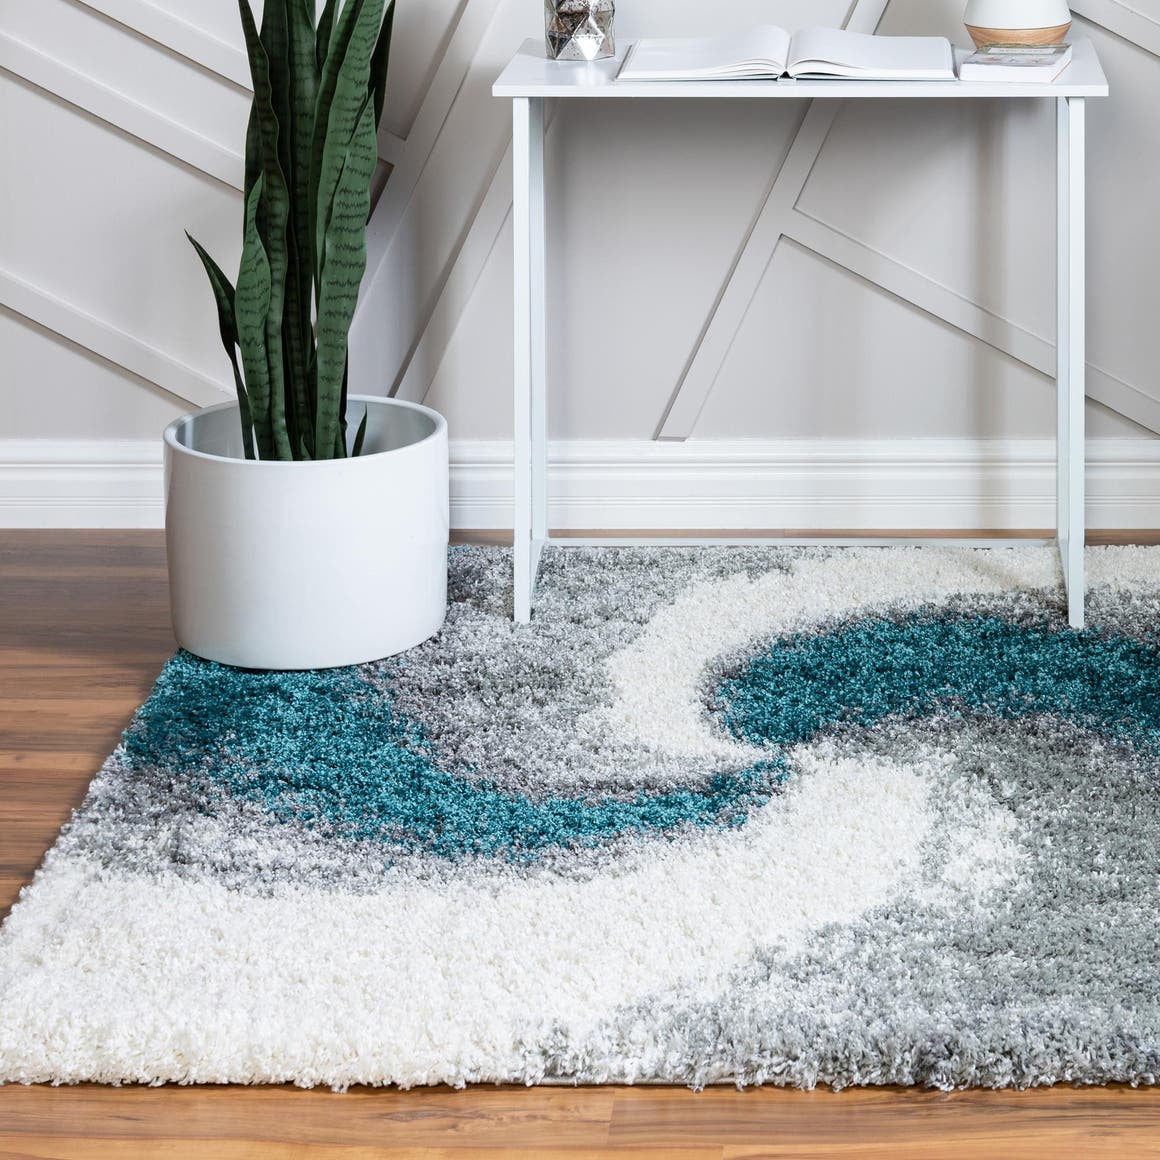 4 Ft Square Turquoise Rug Perfect, Gray And Turquoise Rug